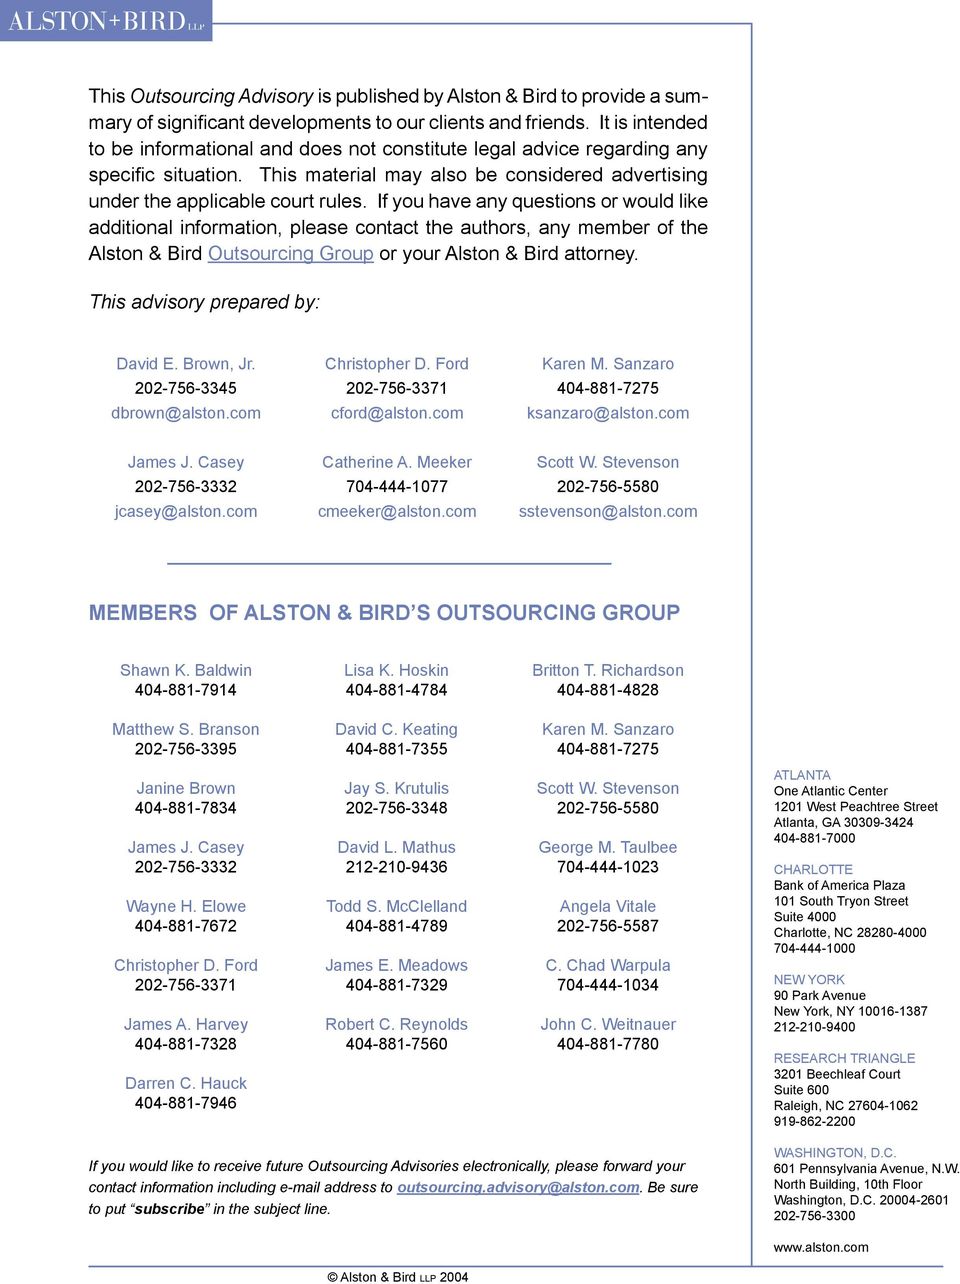 If you have any questions or would like additional information, please contact the authors, any member of the Alston & Bird Outsourcing Group or your Alston & Bird attorney.